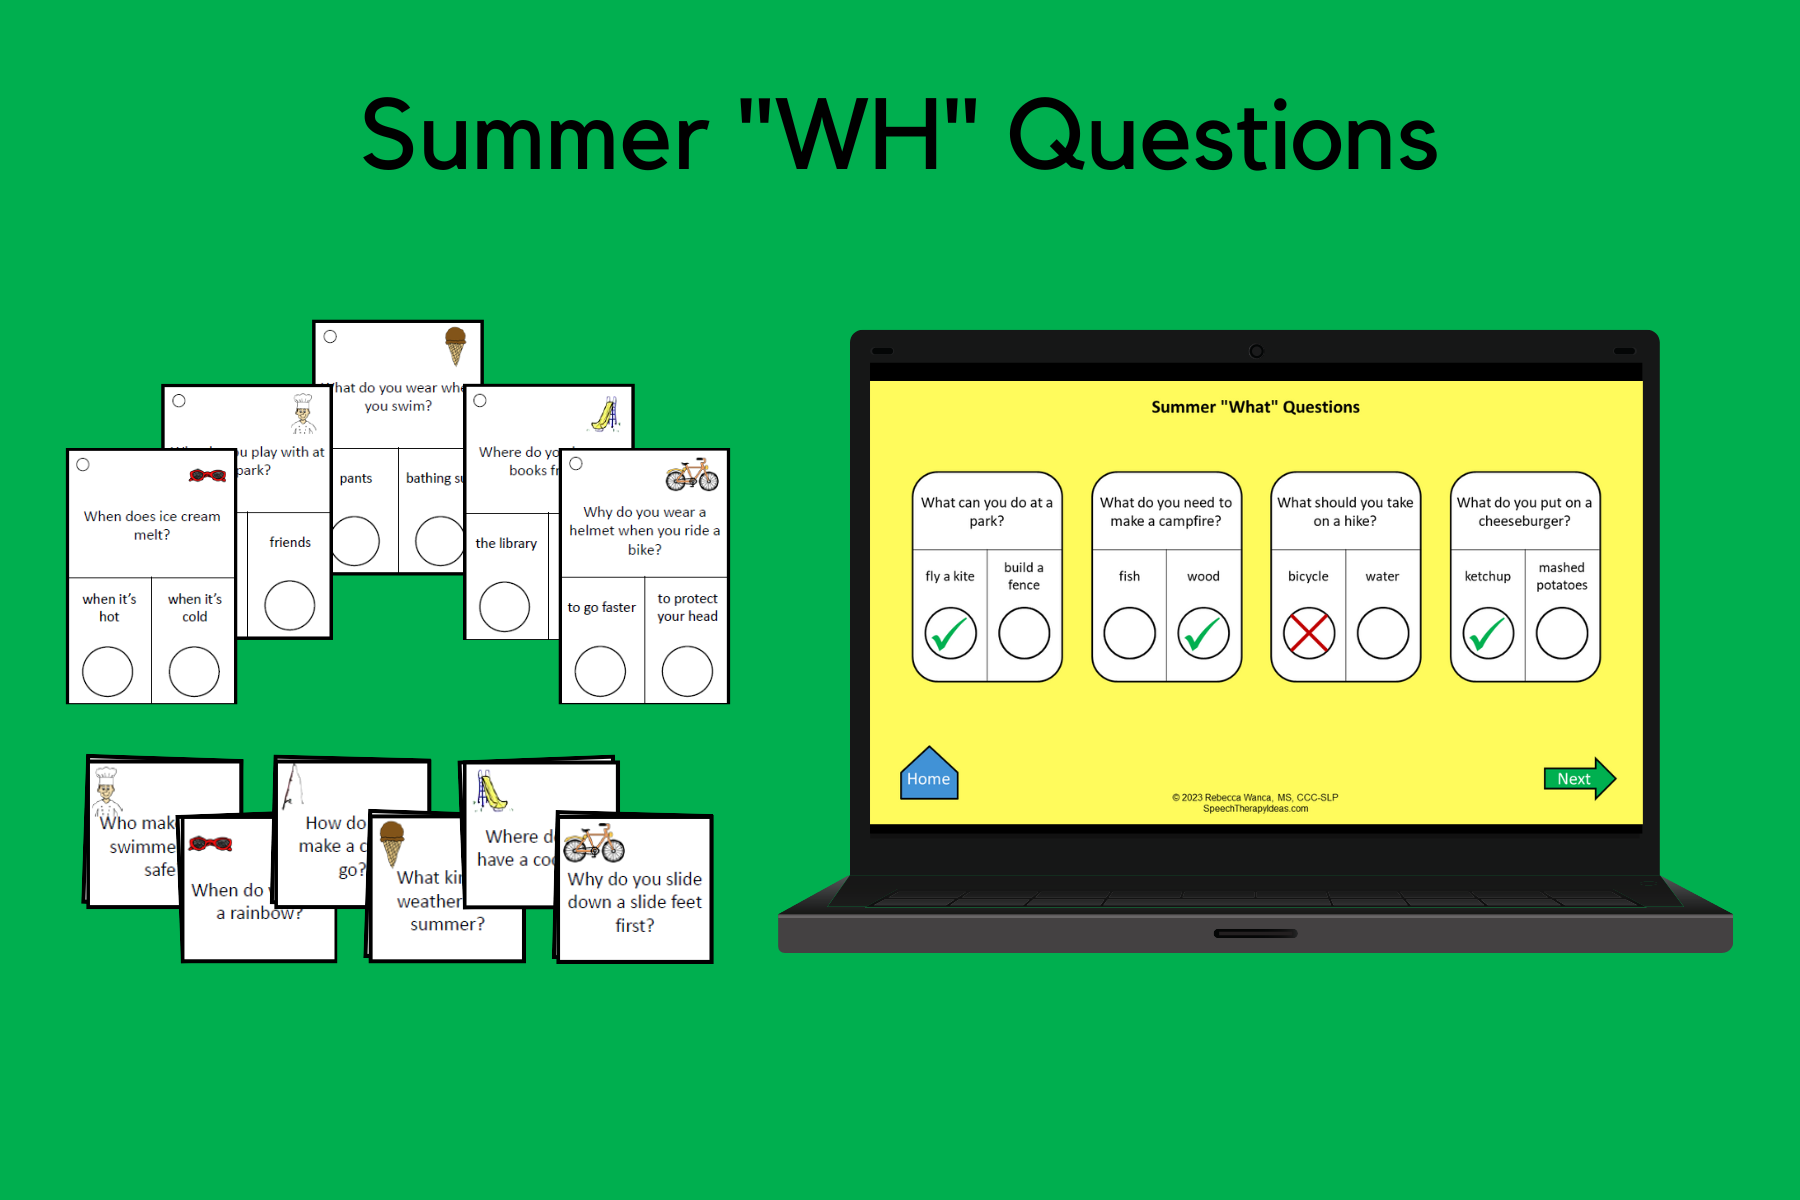 Summer “WH” Questions With And Without Answer Choices